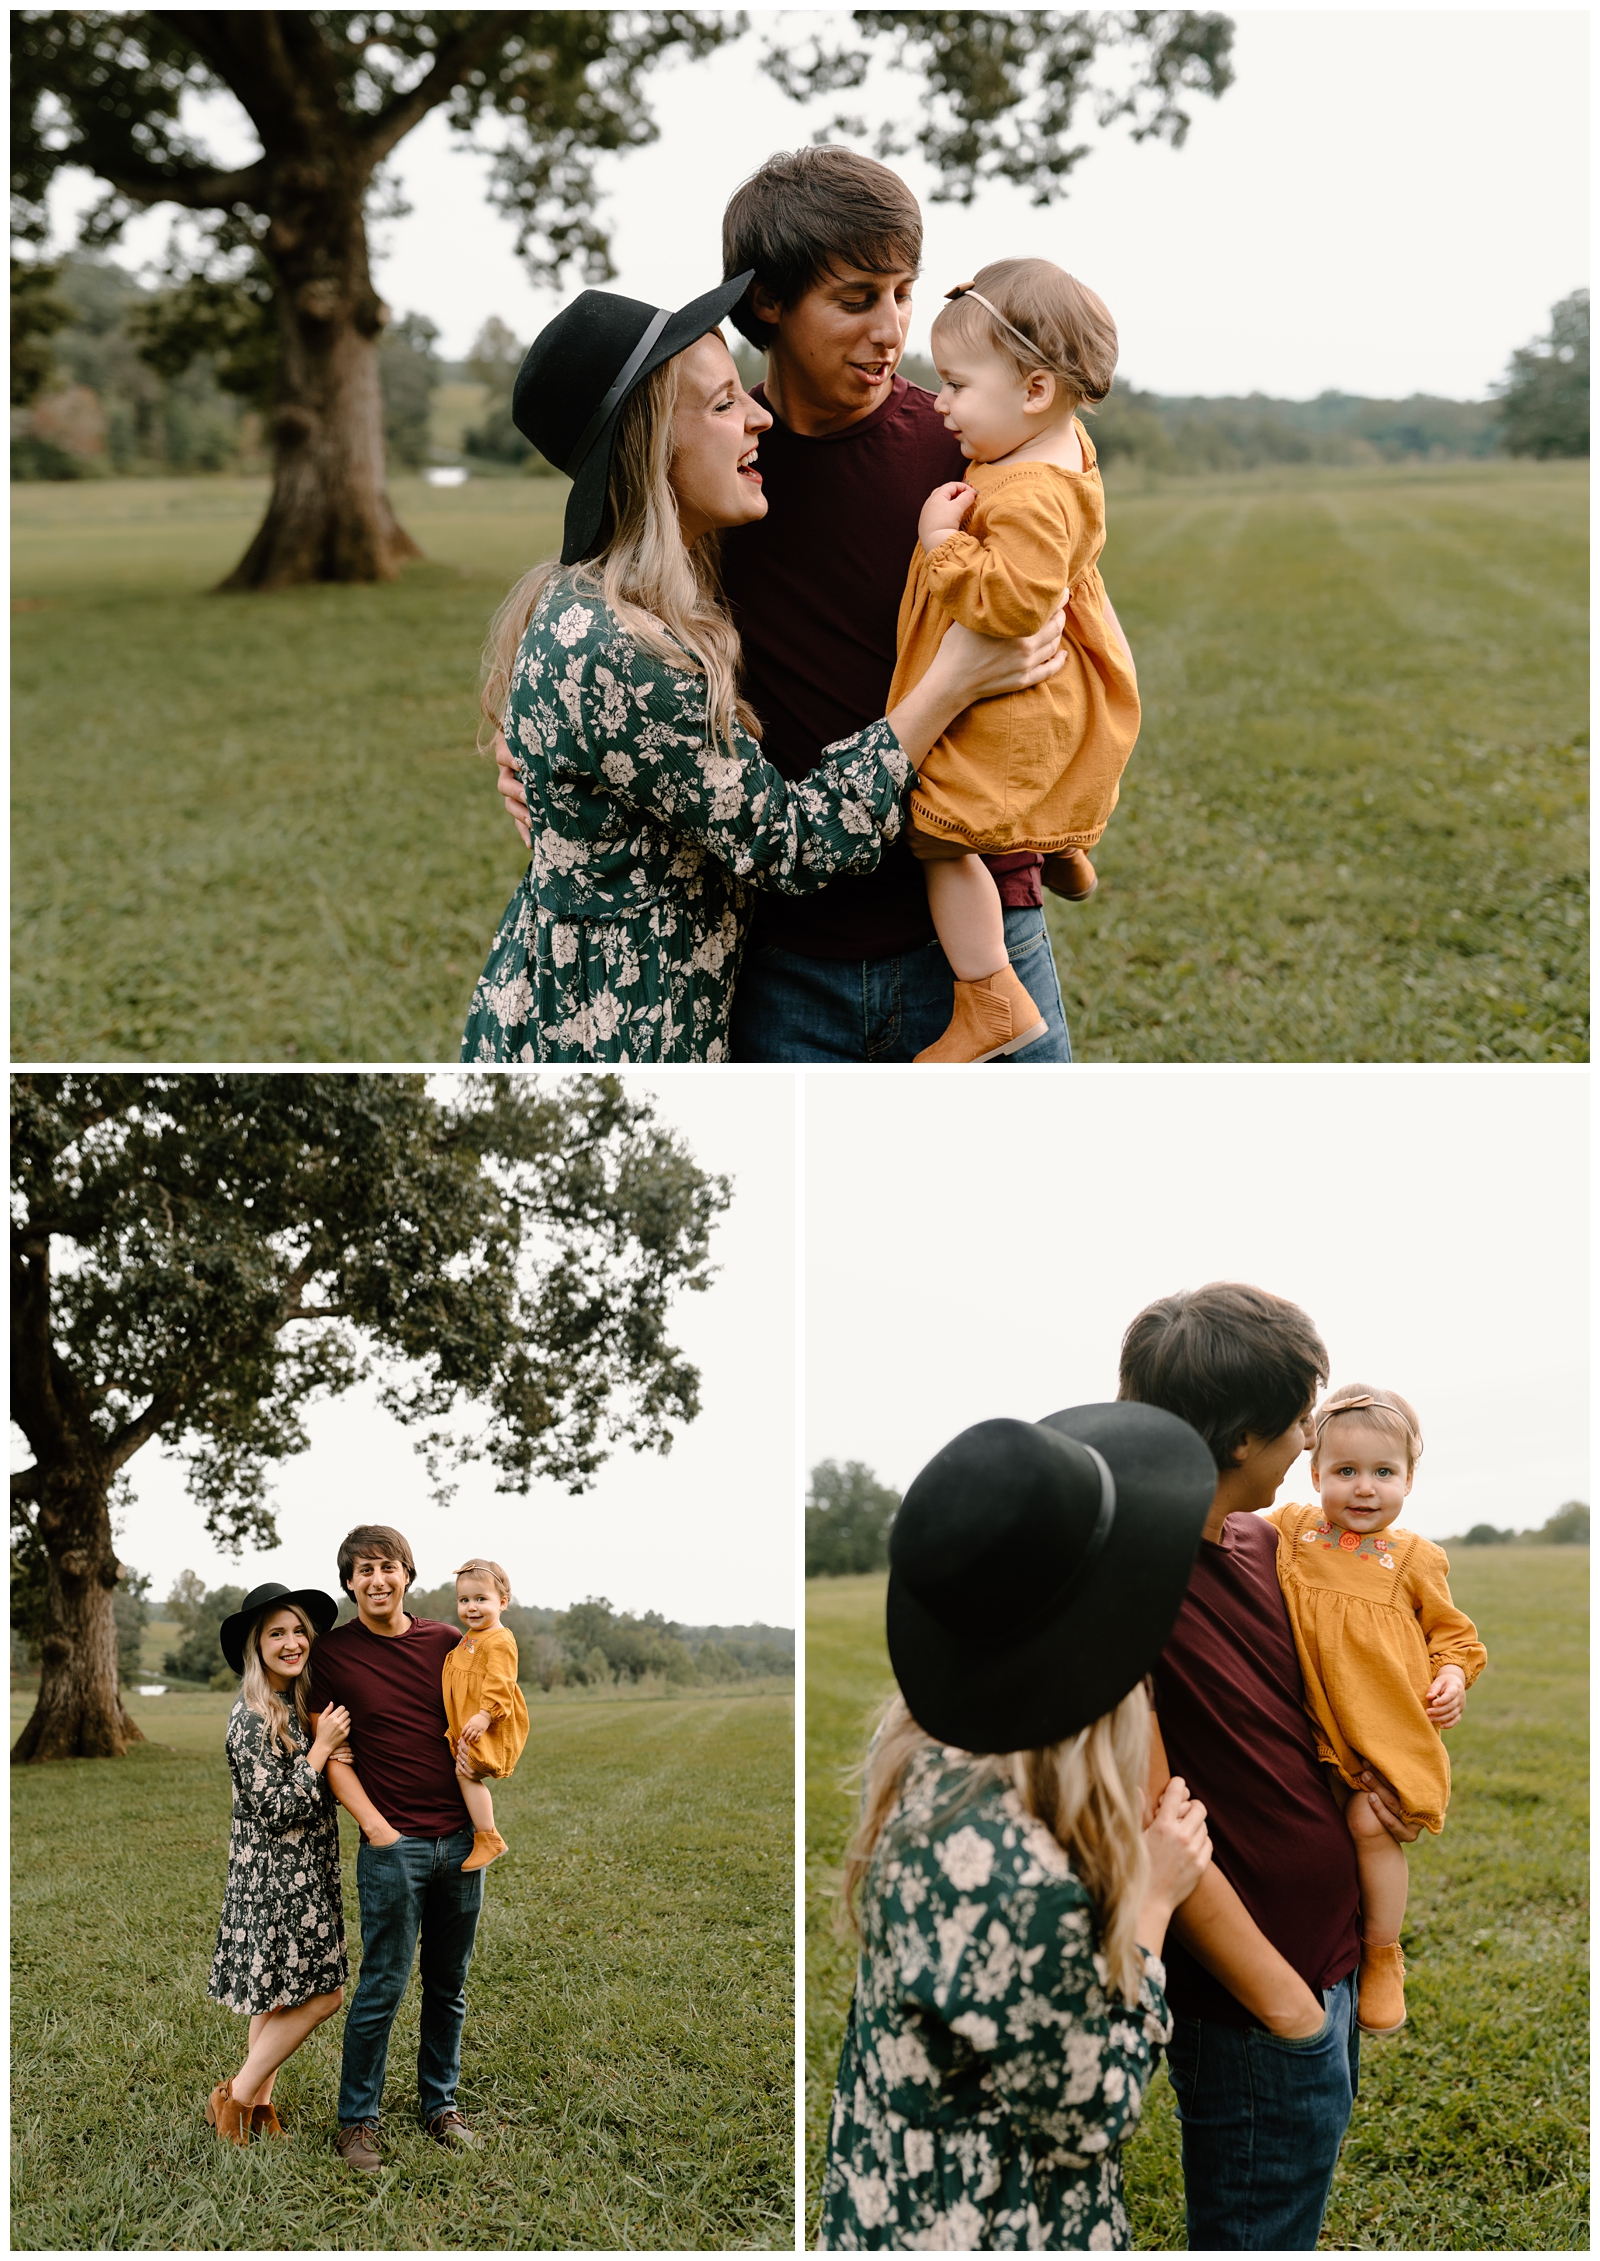 Family session goals at North Carolina's Summerfield Farms